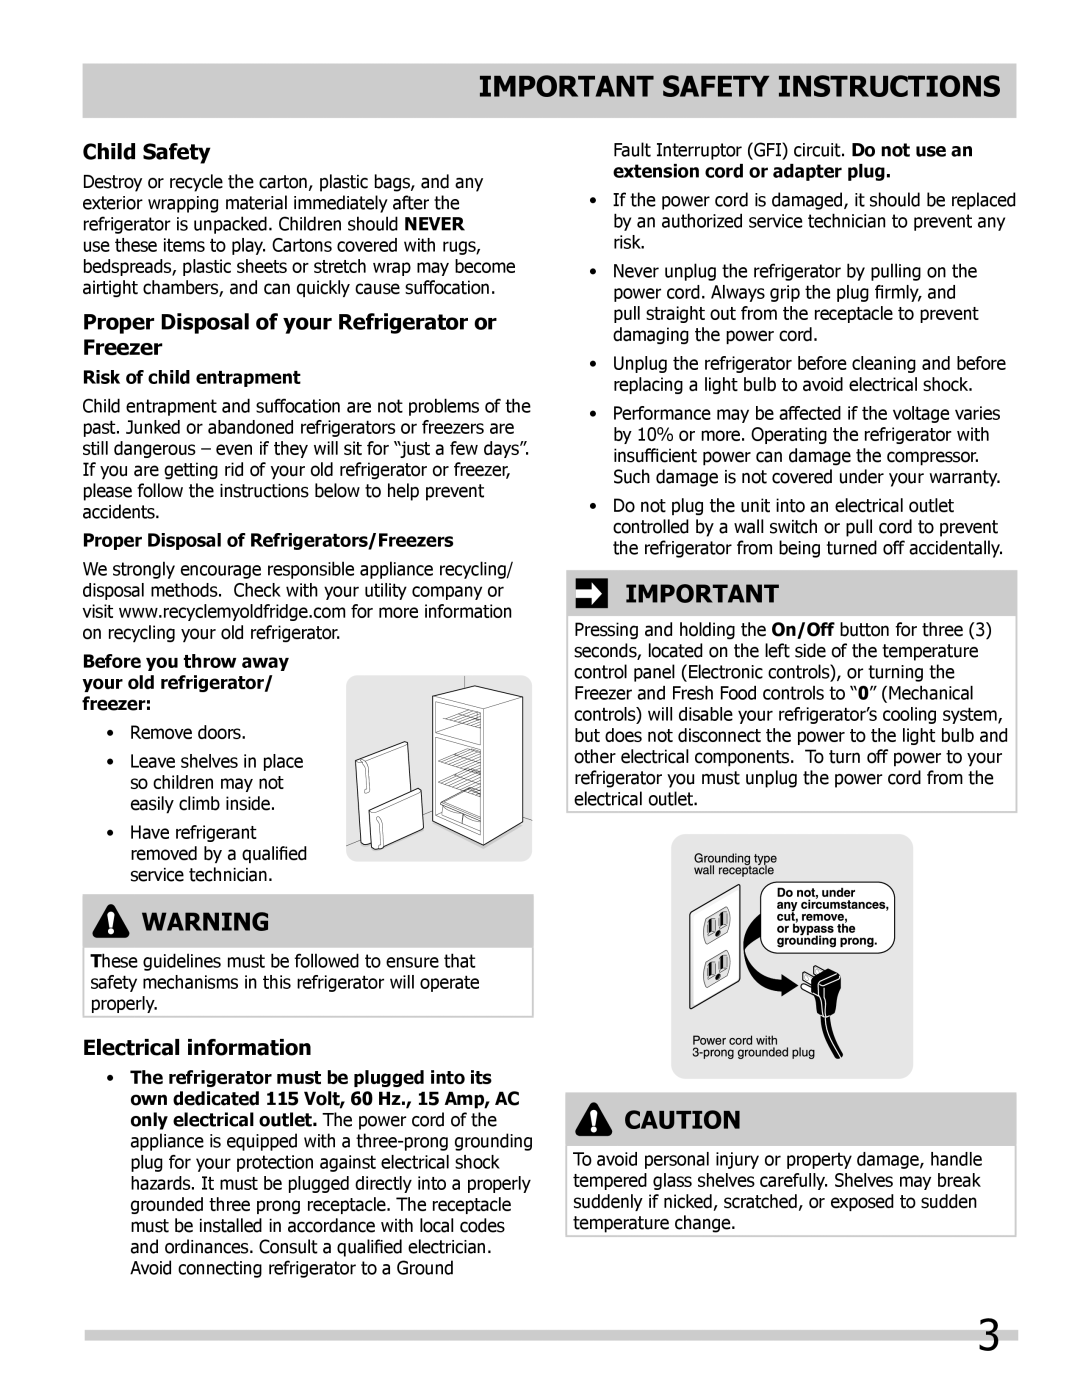 Frigidaire 242008000 manual Child Safety, Proper Disposal of your Refrigerator or Freezer, Electrical information 